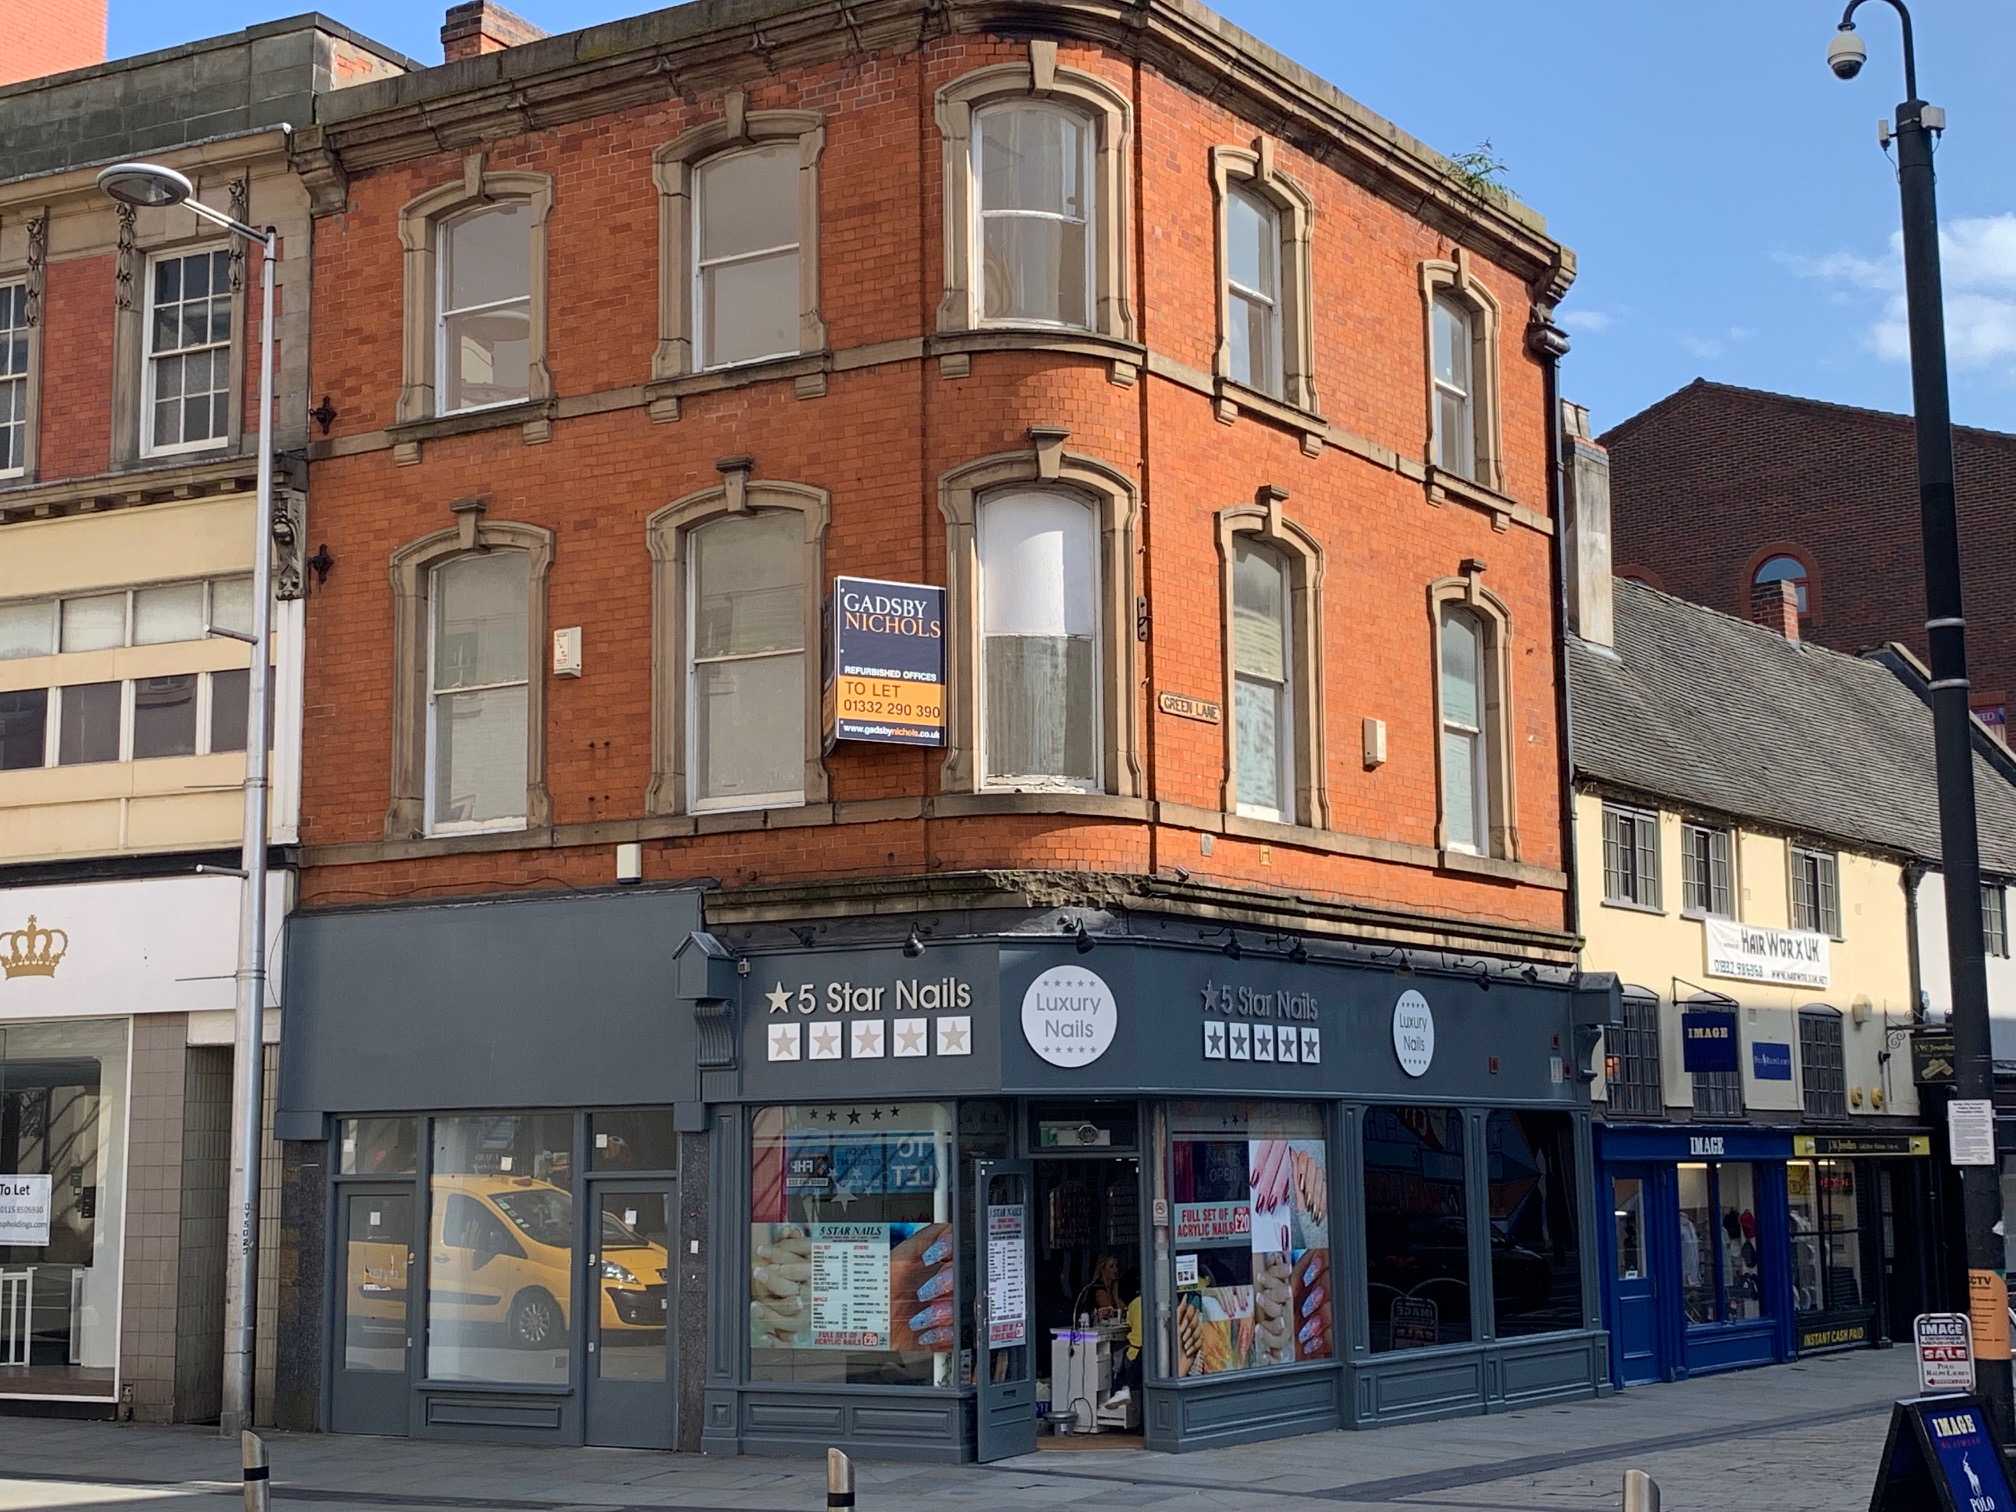 0 bed Mixed Use for rent in Derby. From Gadsby Nichols - Derby